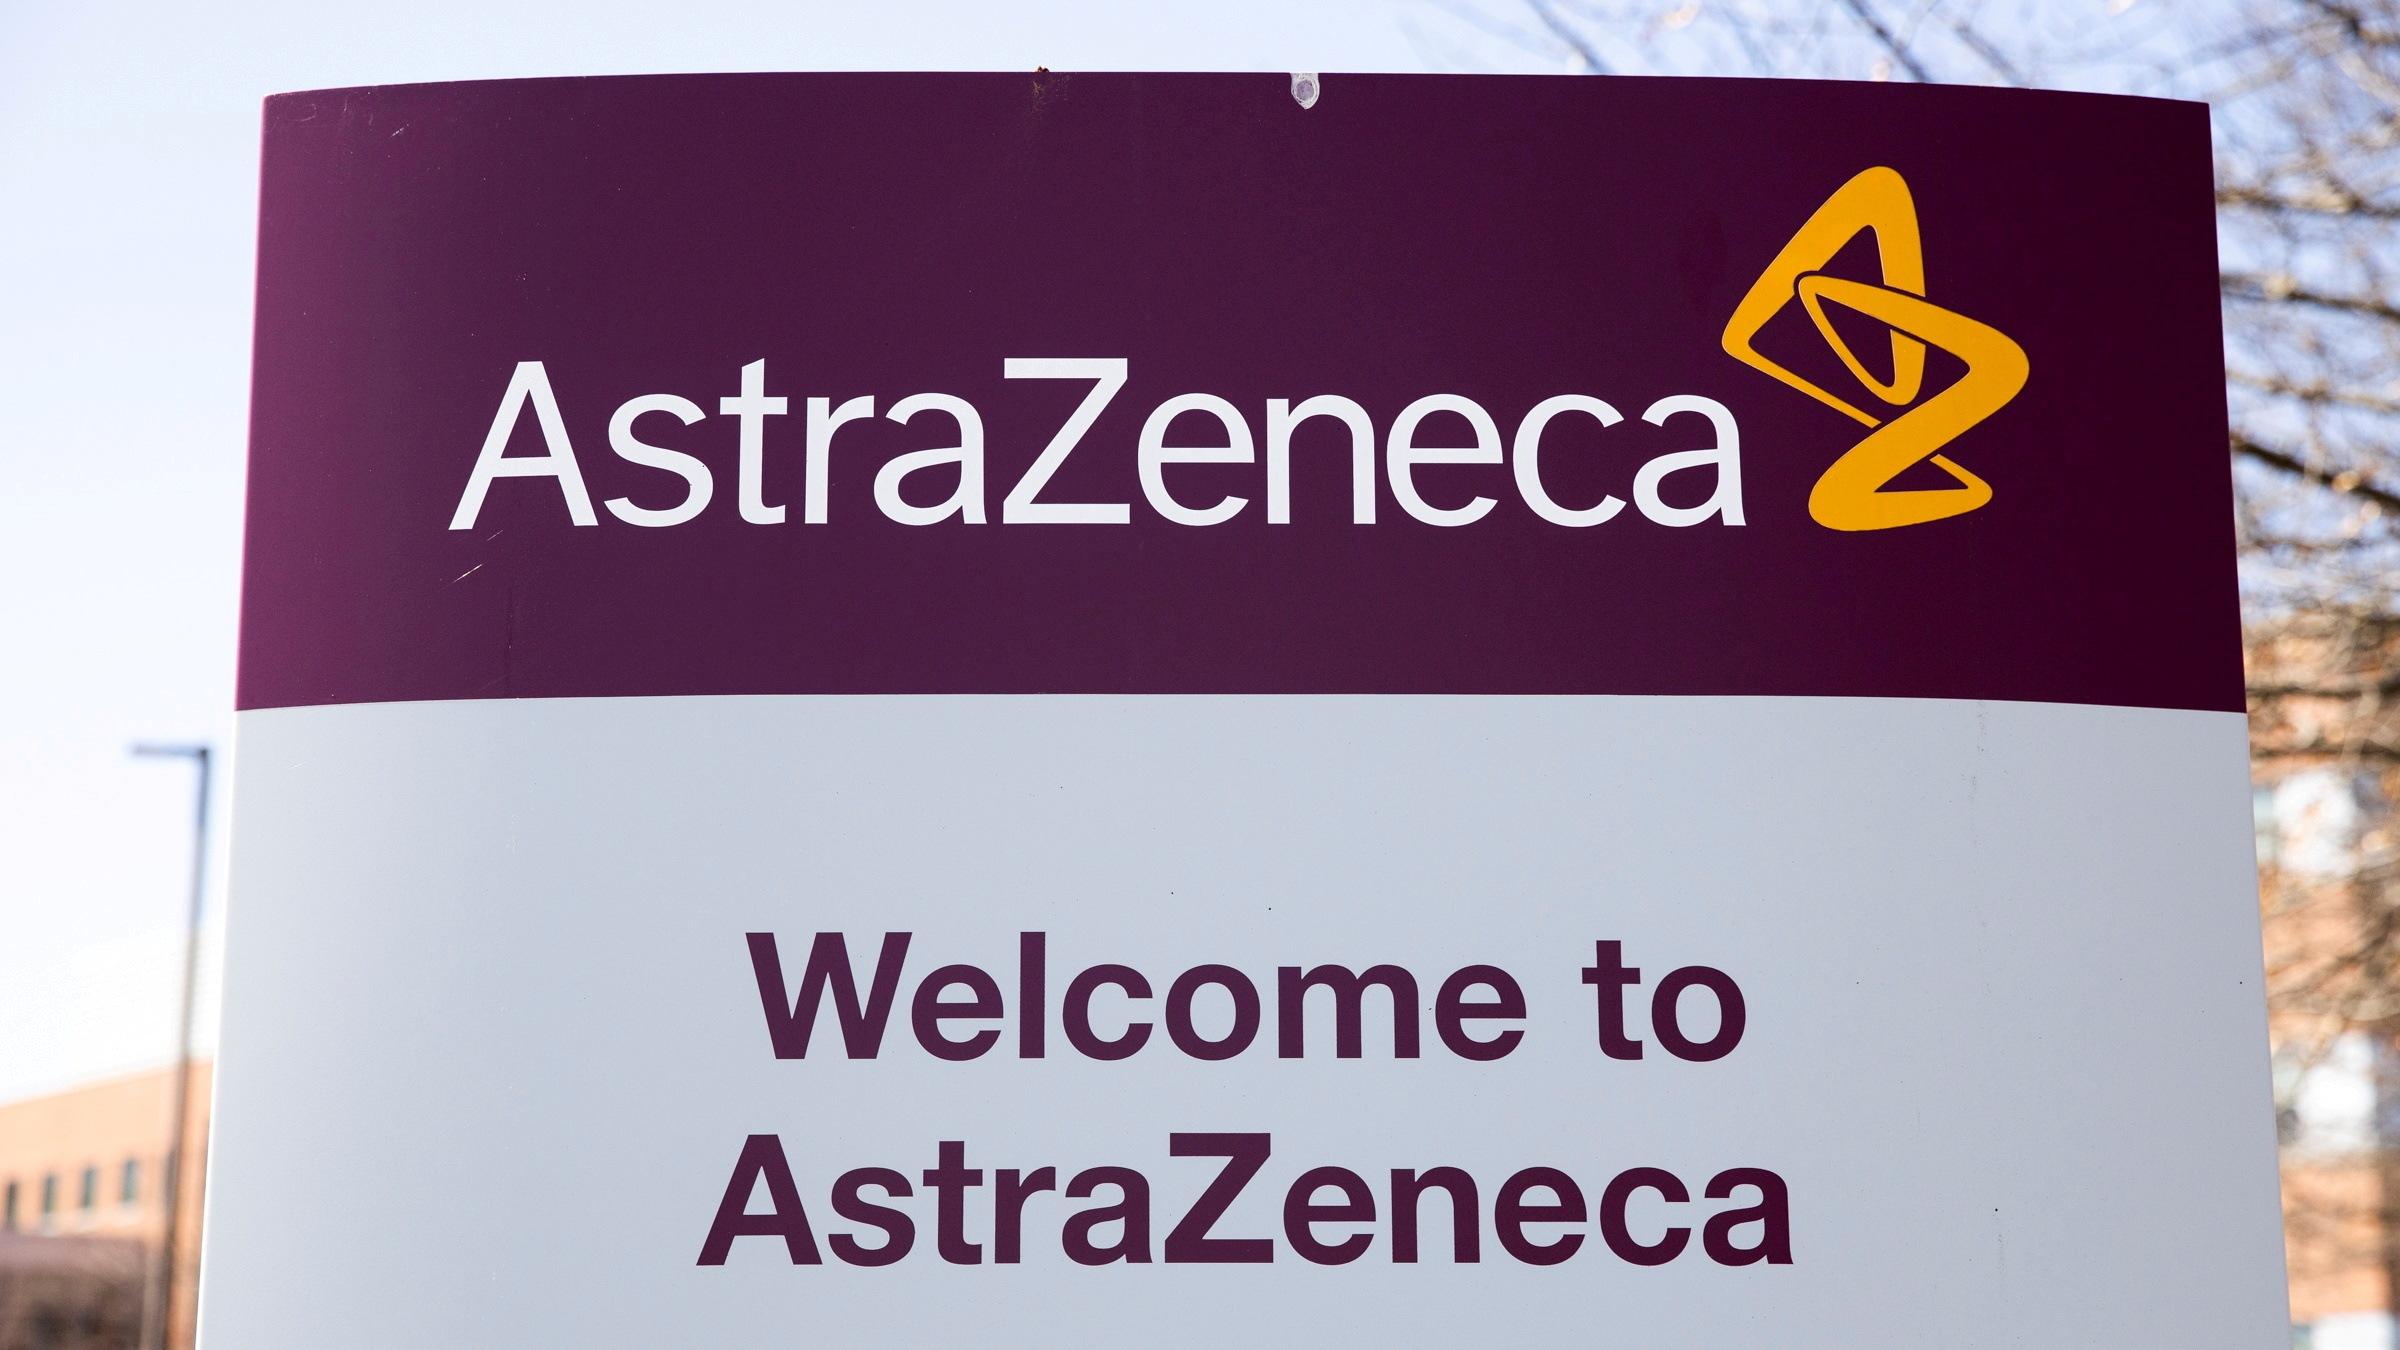 ASTRAZENECA – The group is investing heavily in R&D in Vietnam